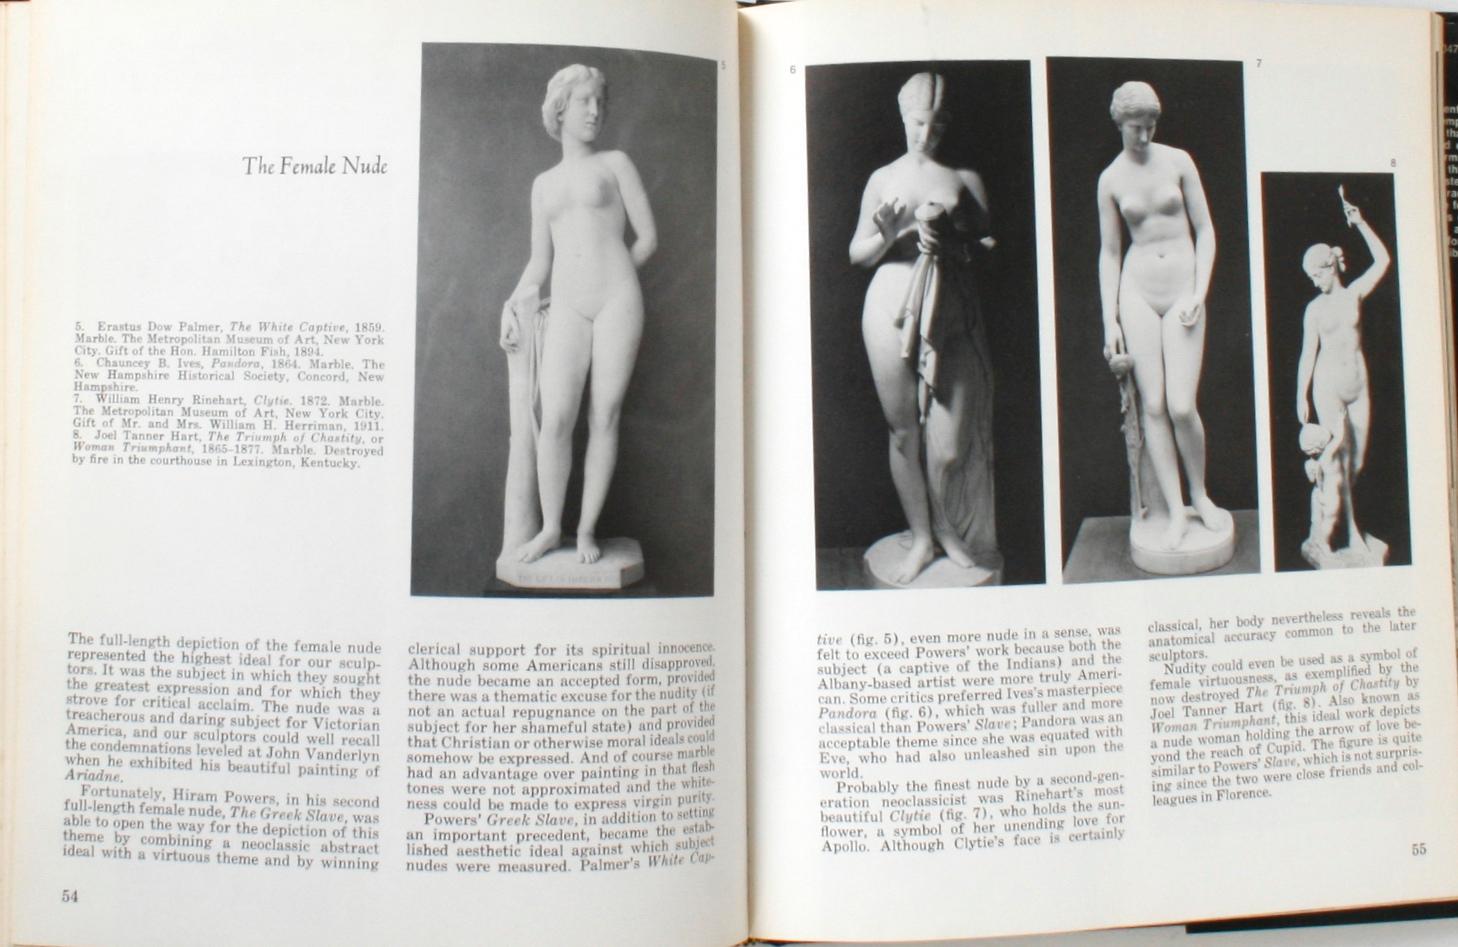 American neoclassic sculpture, the Marble Resurrection by William H. Gerdts. New York: The Viking Press, 1973. 1st Ed hardcover with dust jacket. 160 pp. Overview of American neoclassic sculpture in the 19th and 20th centuries. Chapters include: The